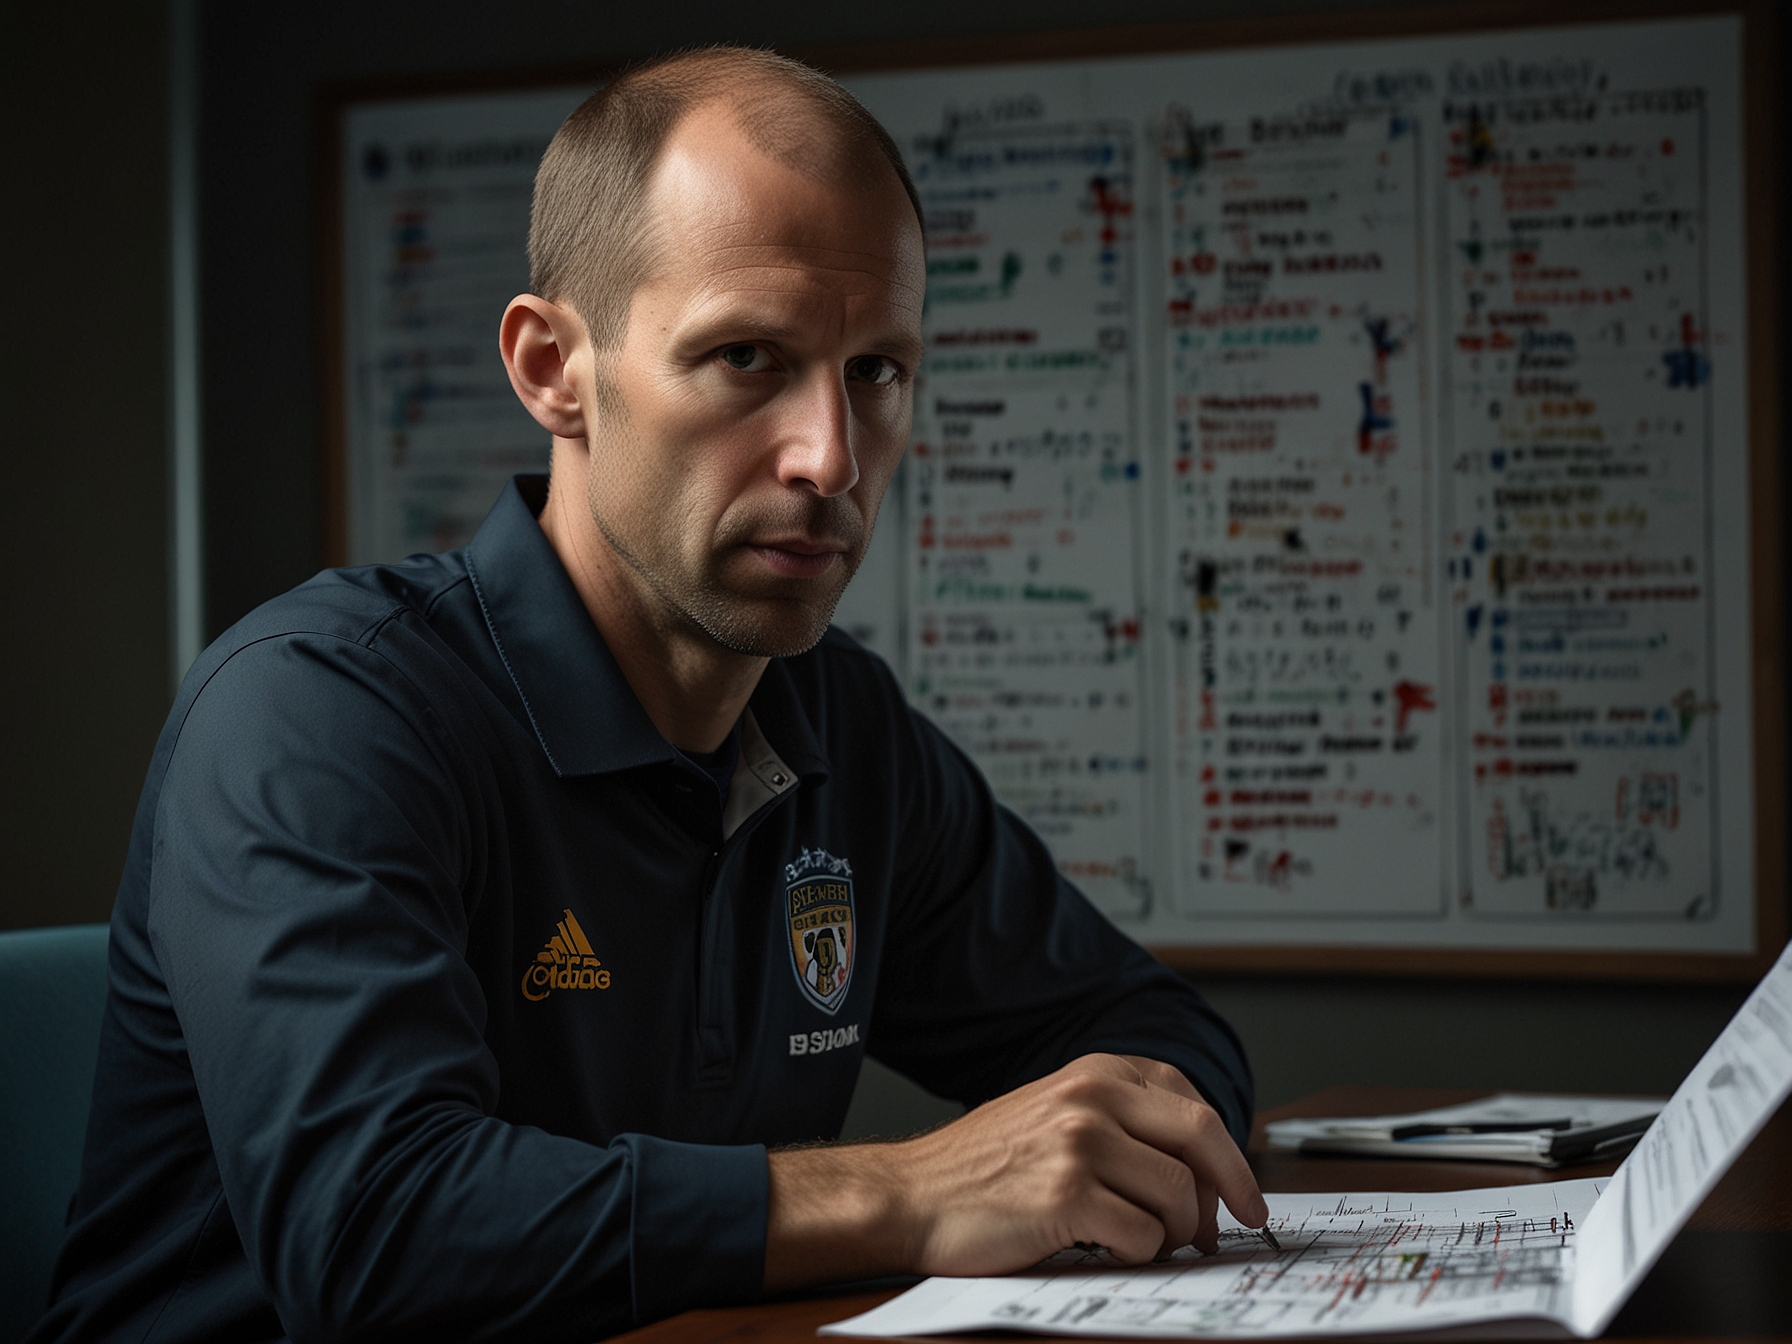 An illustration of Gregg Berhalter deep in thought, reviewing tactical plans and player statistics, representing the complex decisions he faces ahead of Copa América.